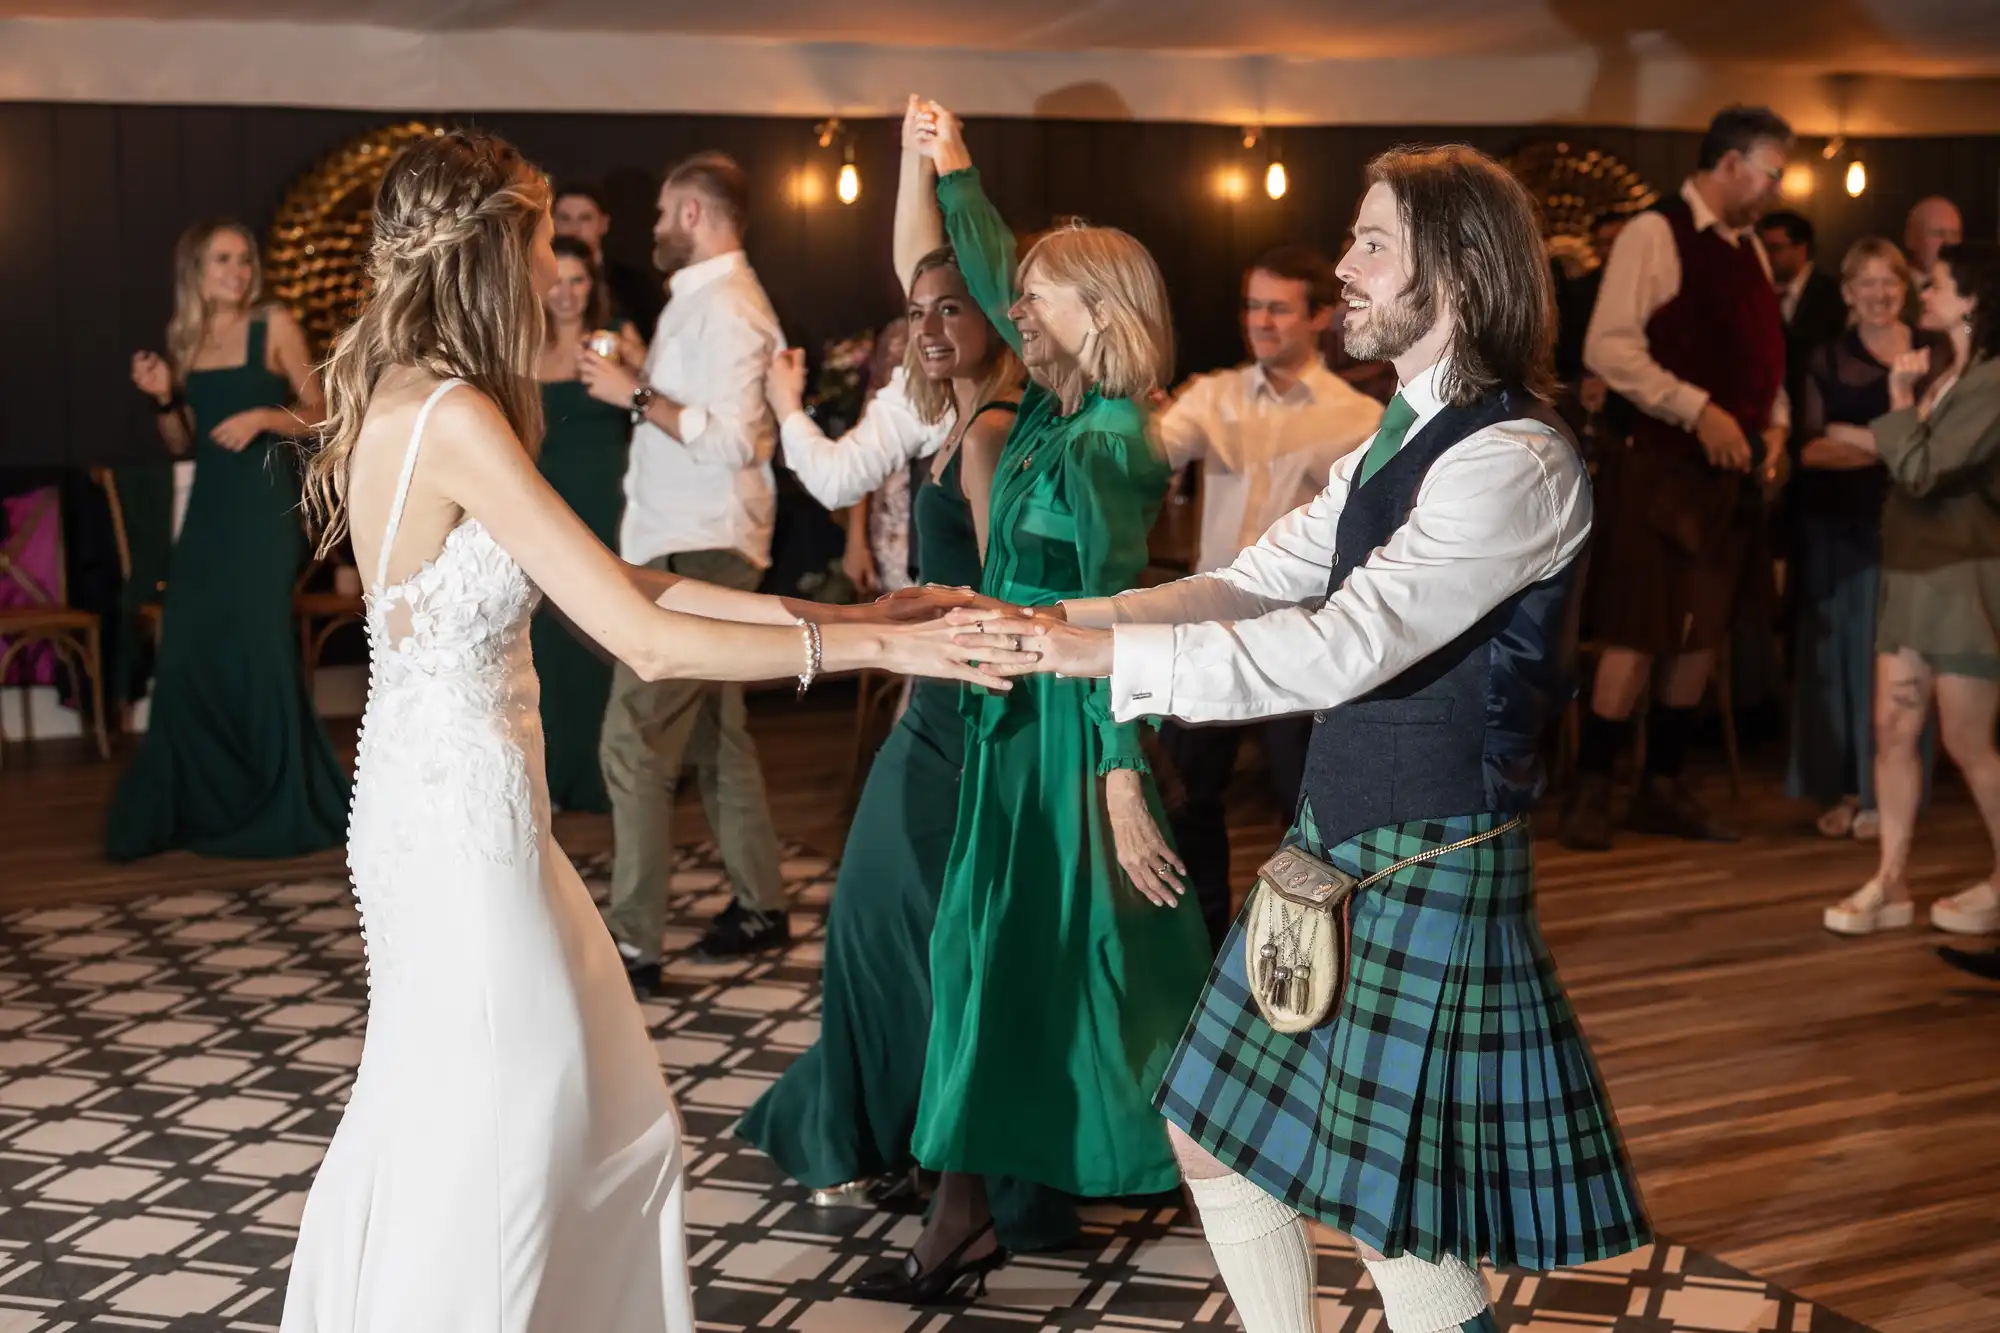 A bride and a man in a kilt dance together at a wedding reception, surrounded by guests dressed in green attire.